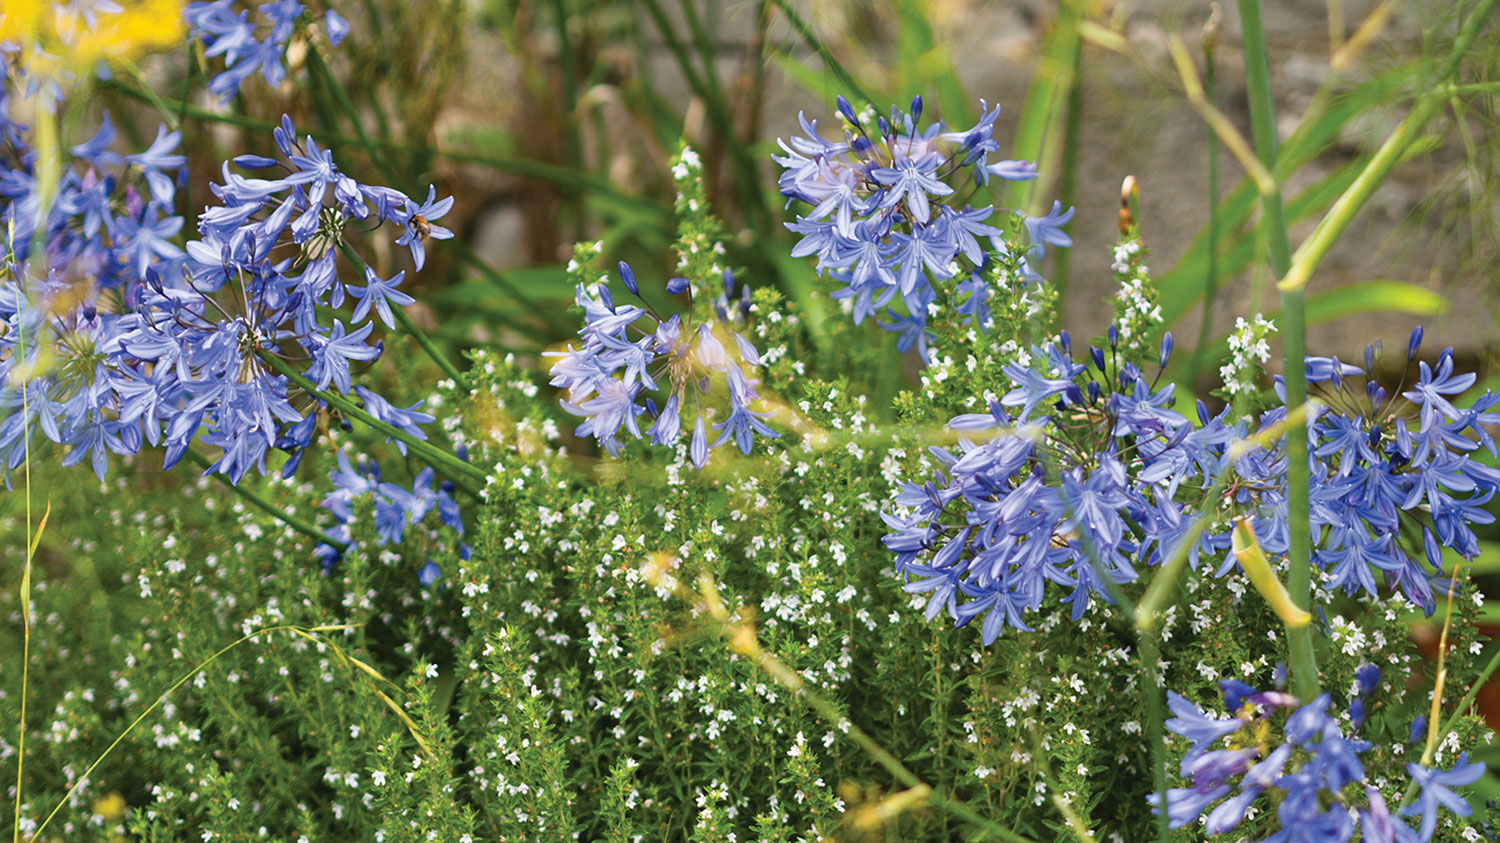 Photo of blooming blue agapanthus interplanted with an herbaceous plant with small white flowers